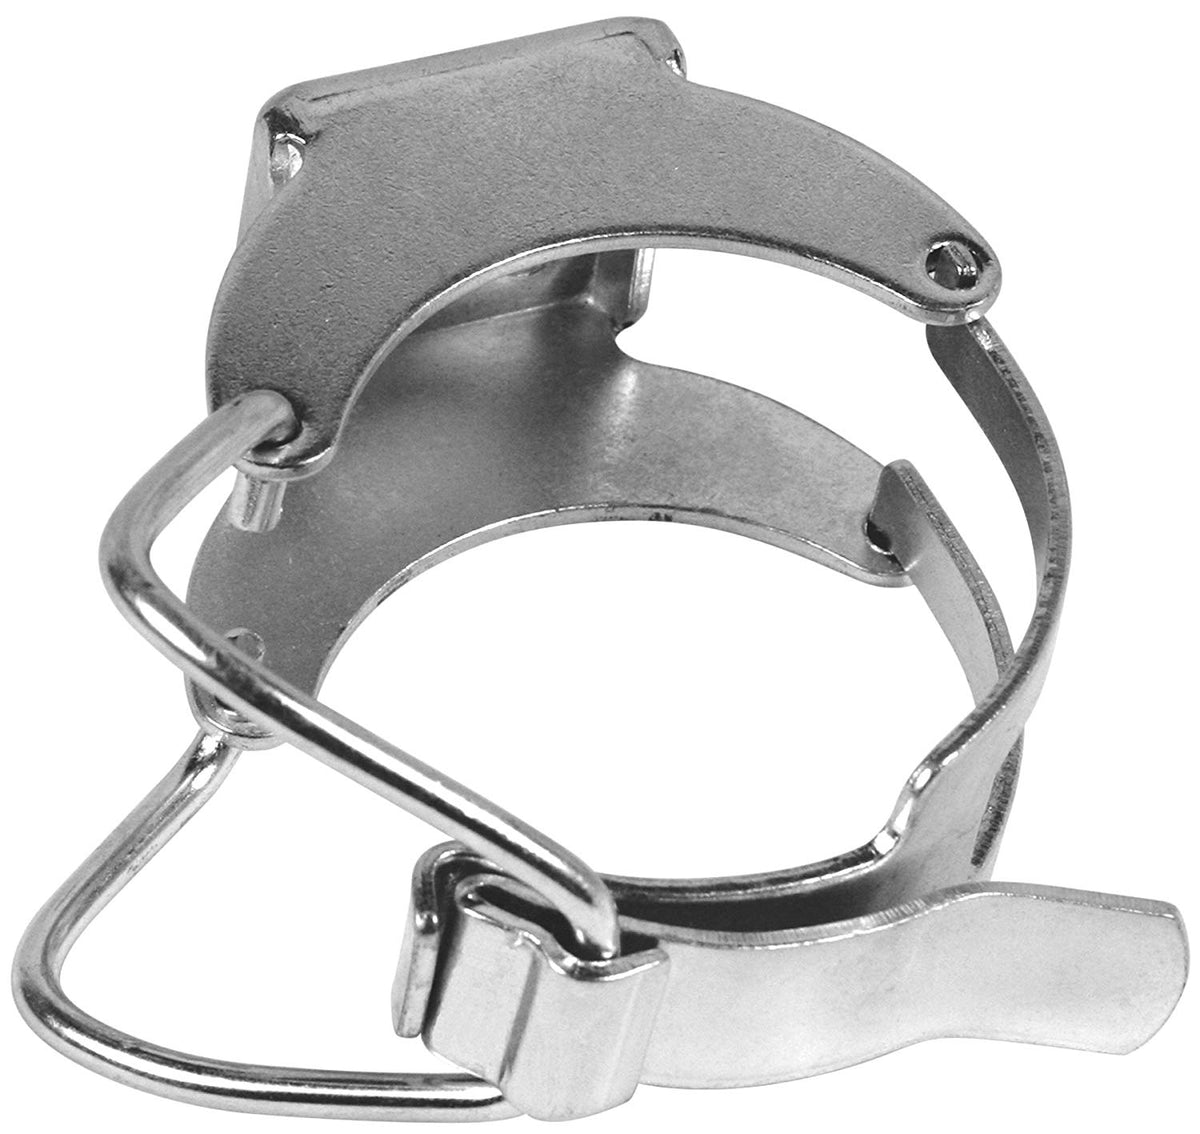 Performance Tool W54271 Wall Mounted Grease Gun Holder with Center Latch Locks